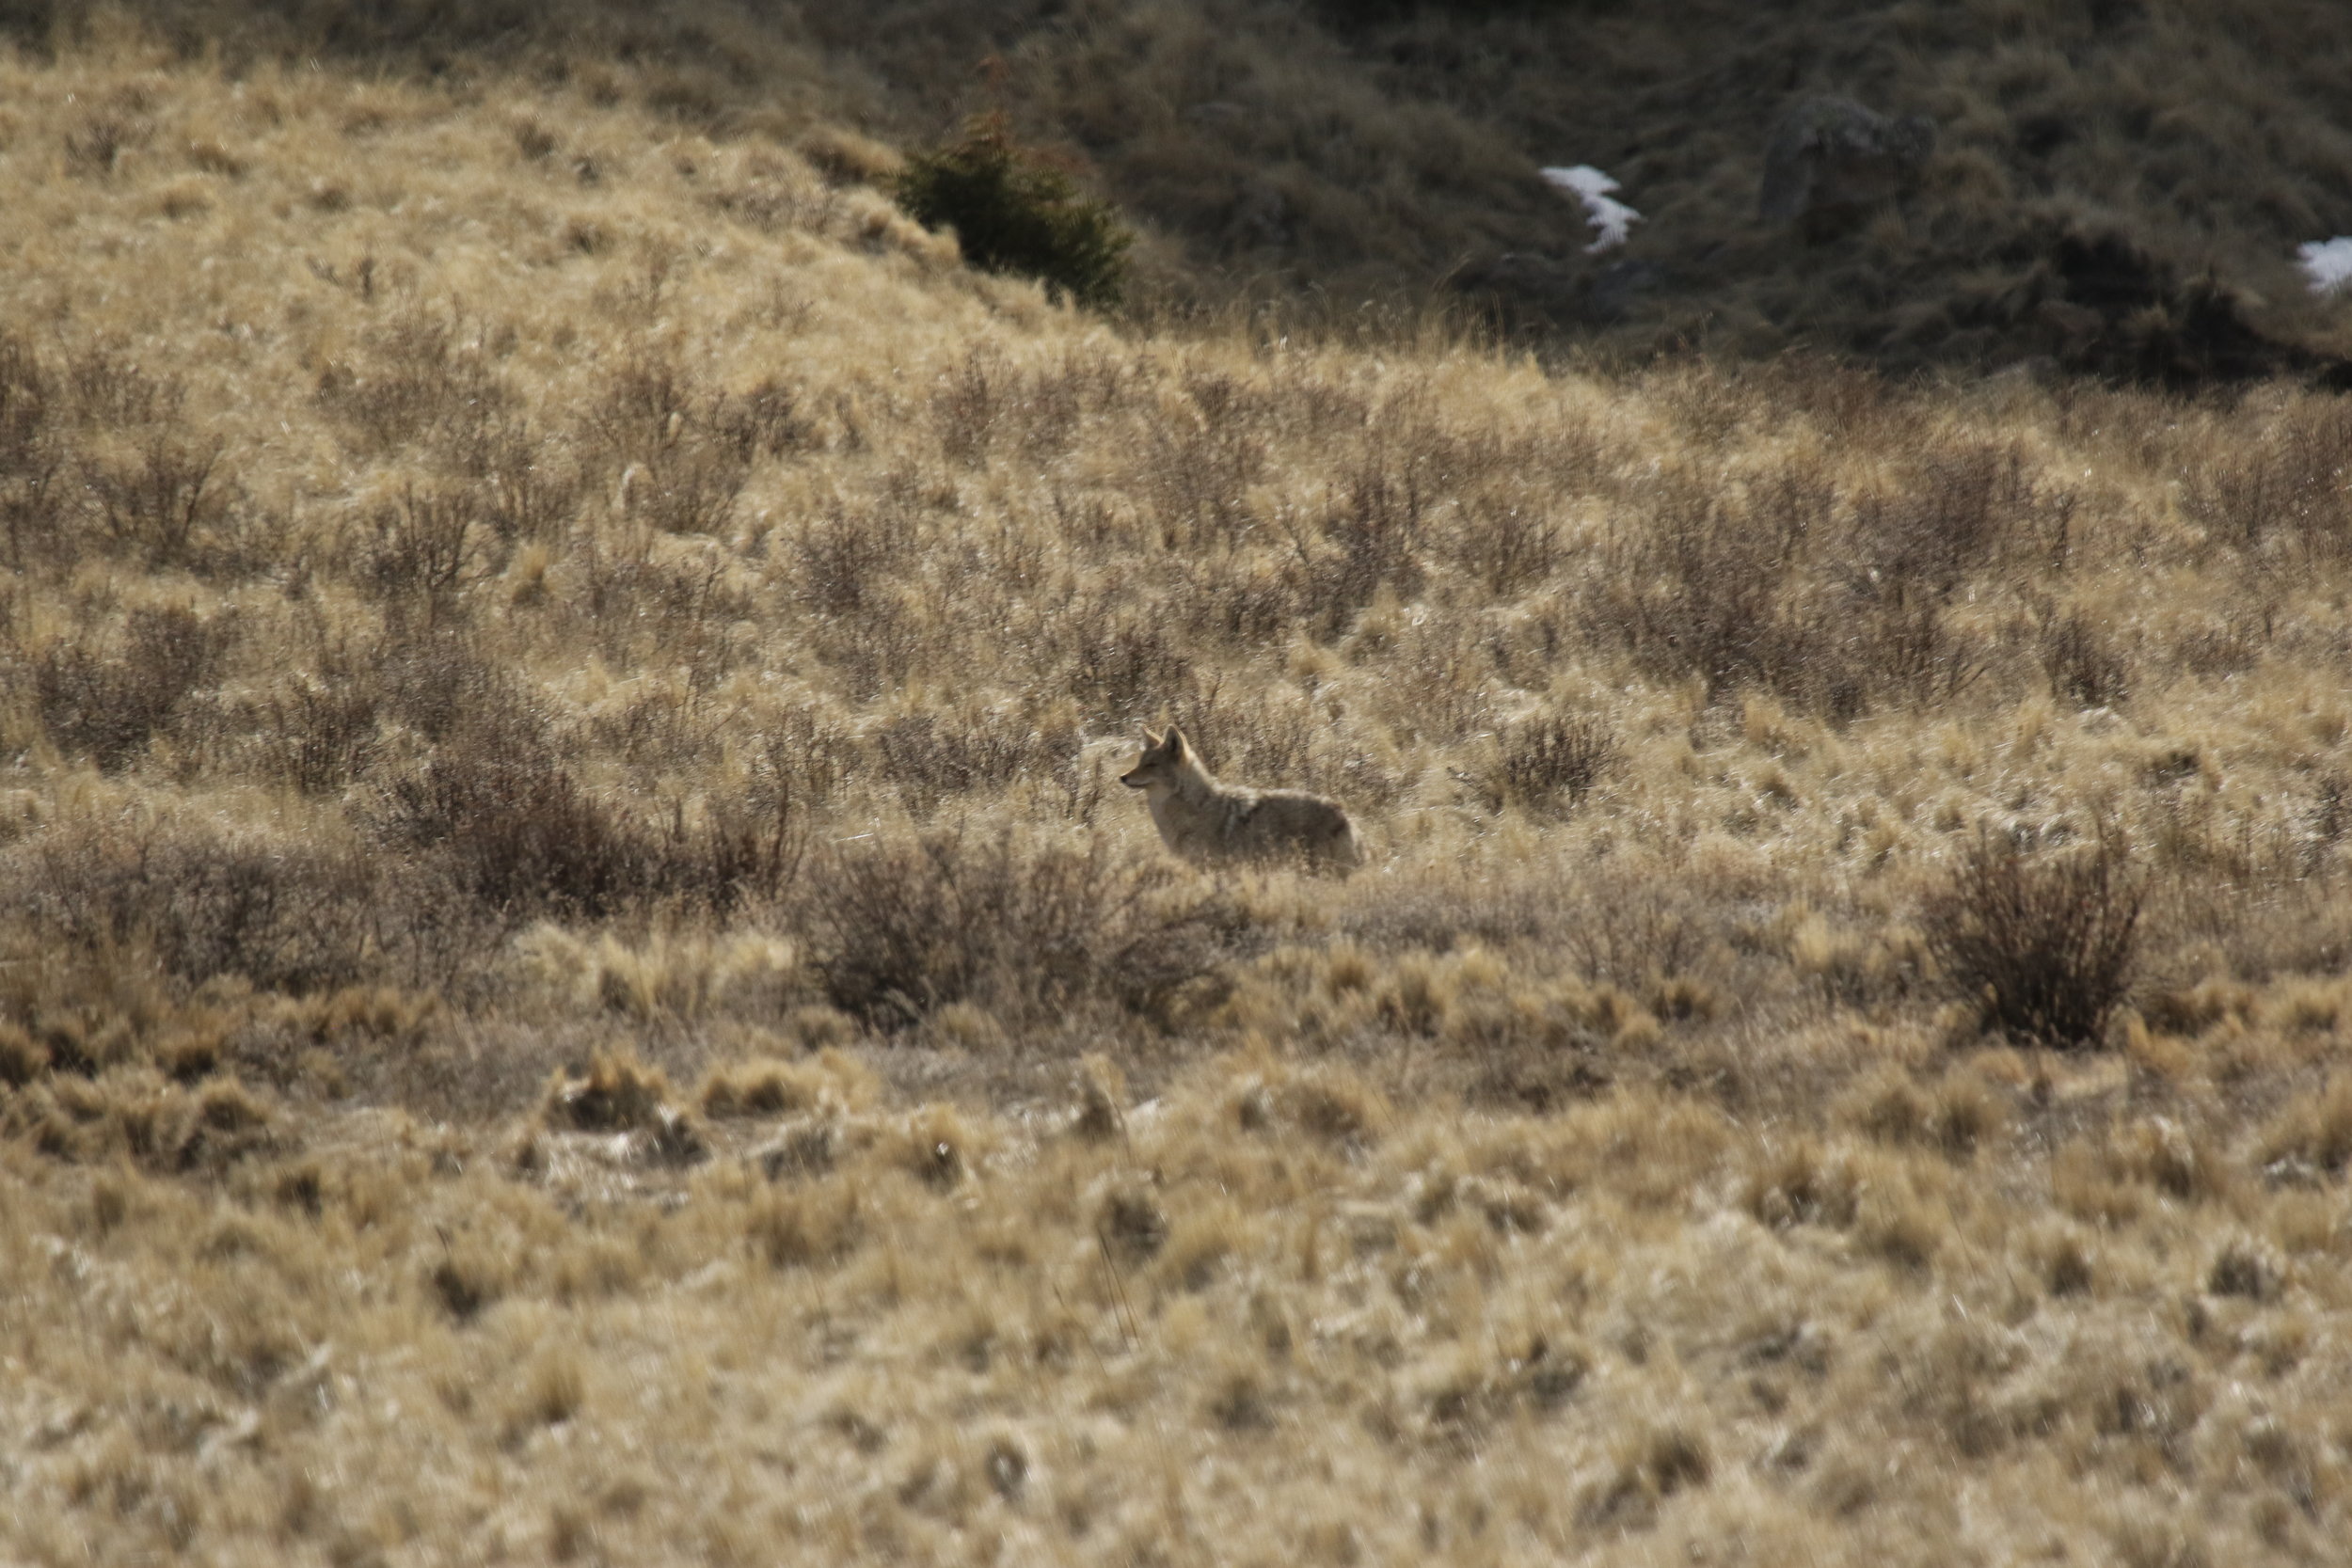  A coyote hunts in the taller grass.  ©MRR 2017  